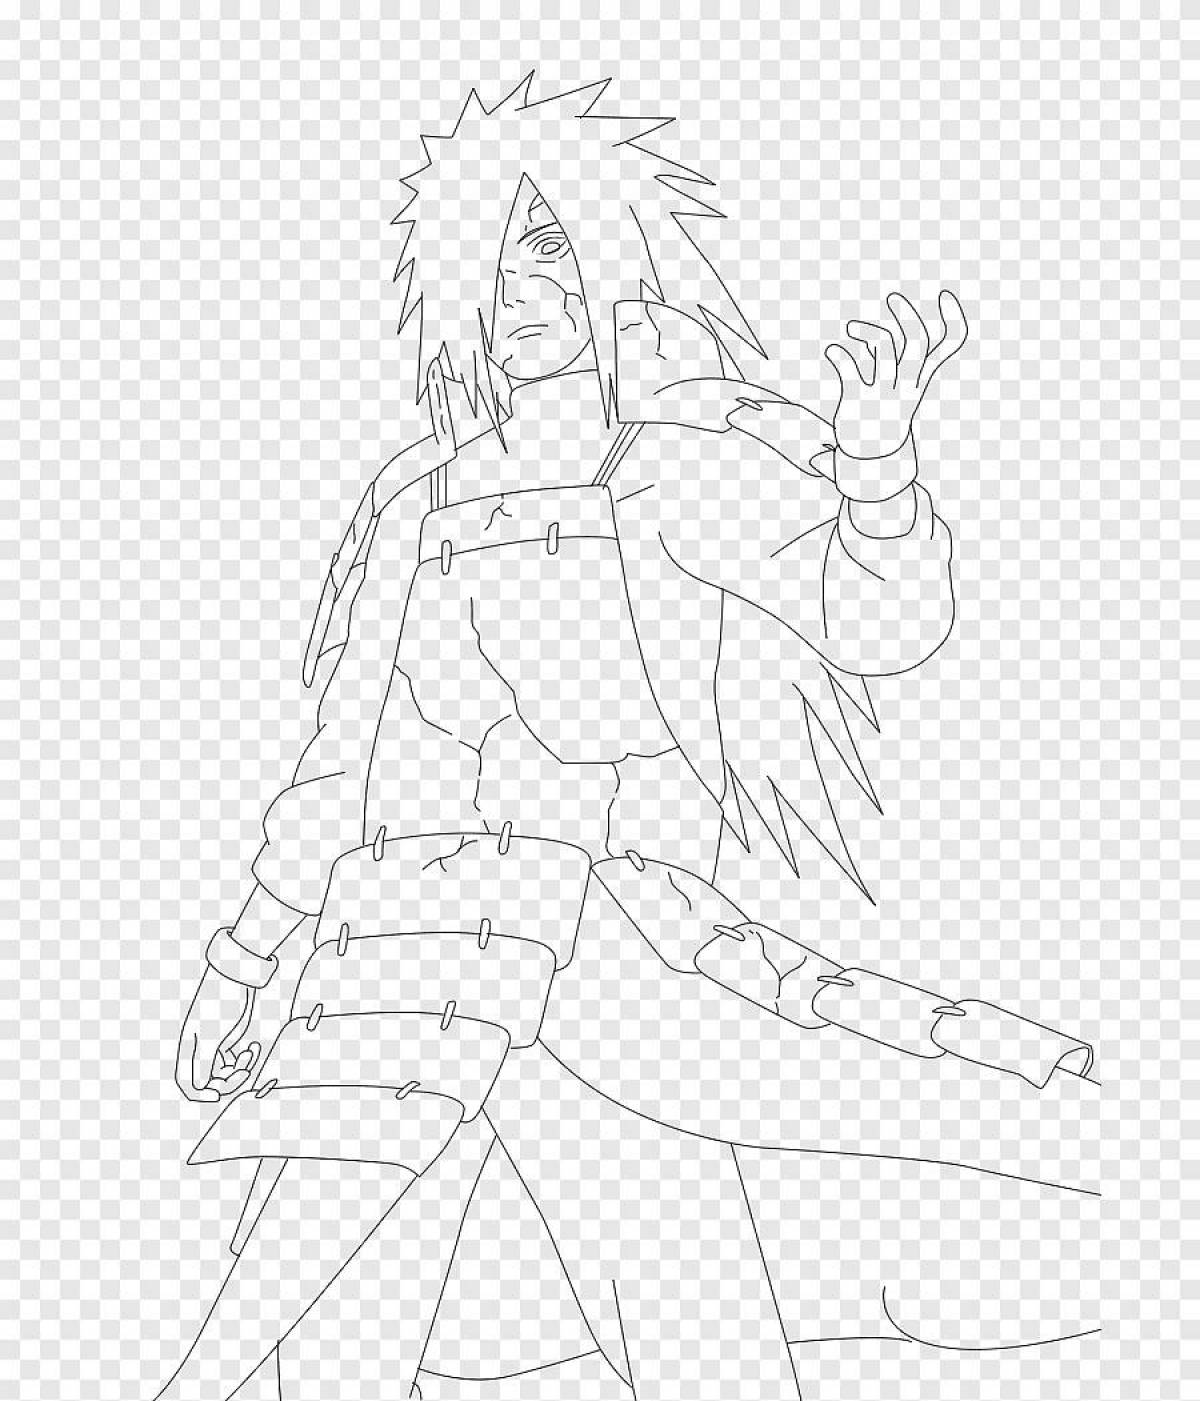 Brightly colored madara coloring page